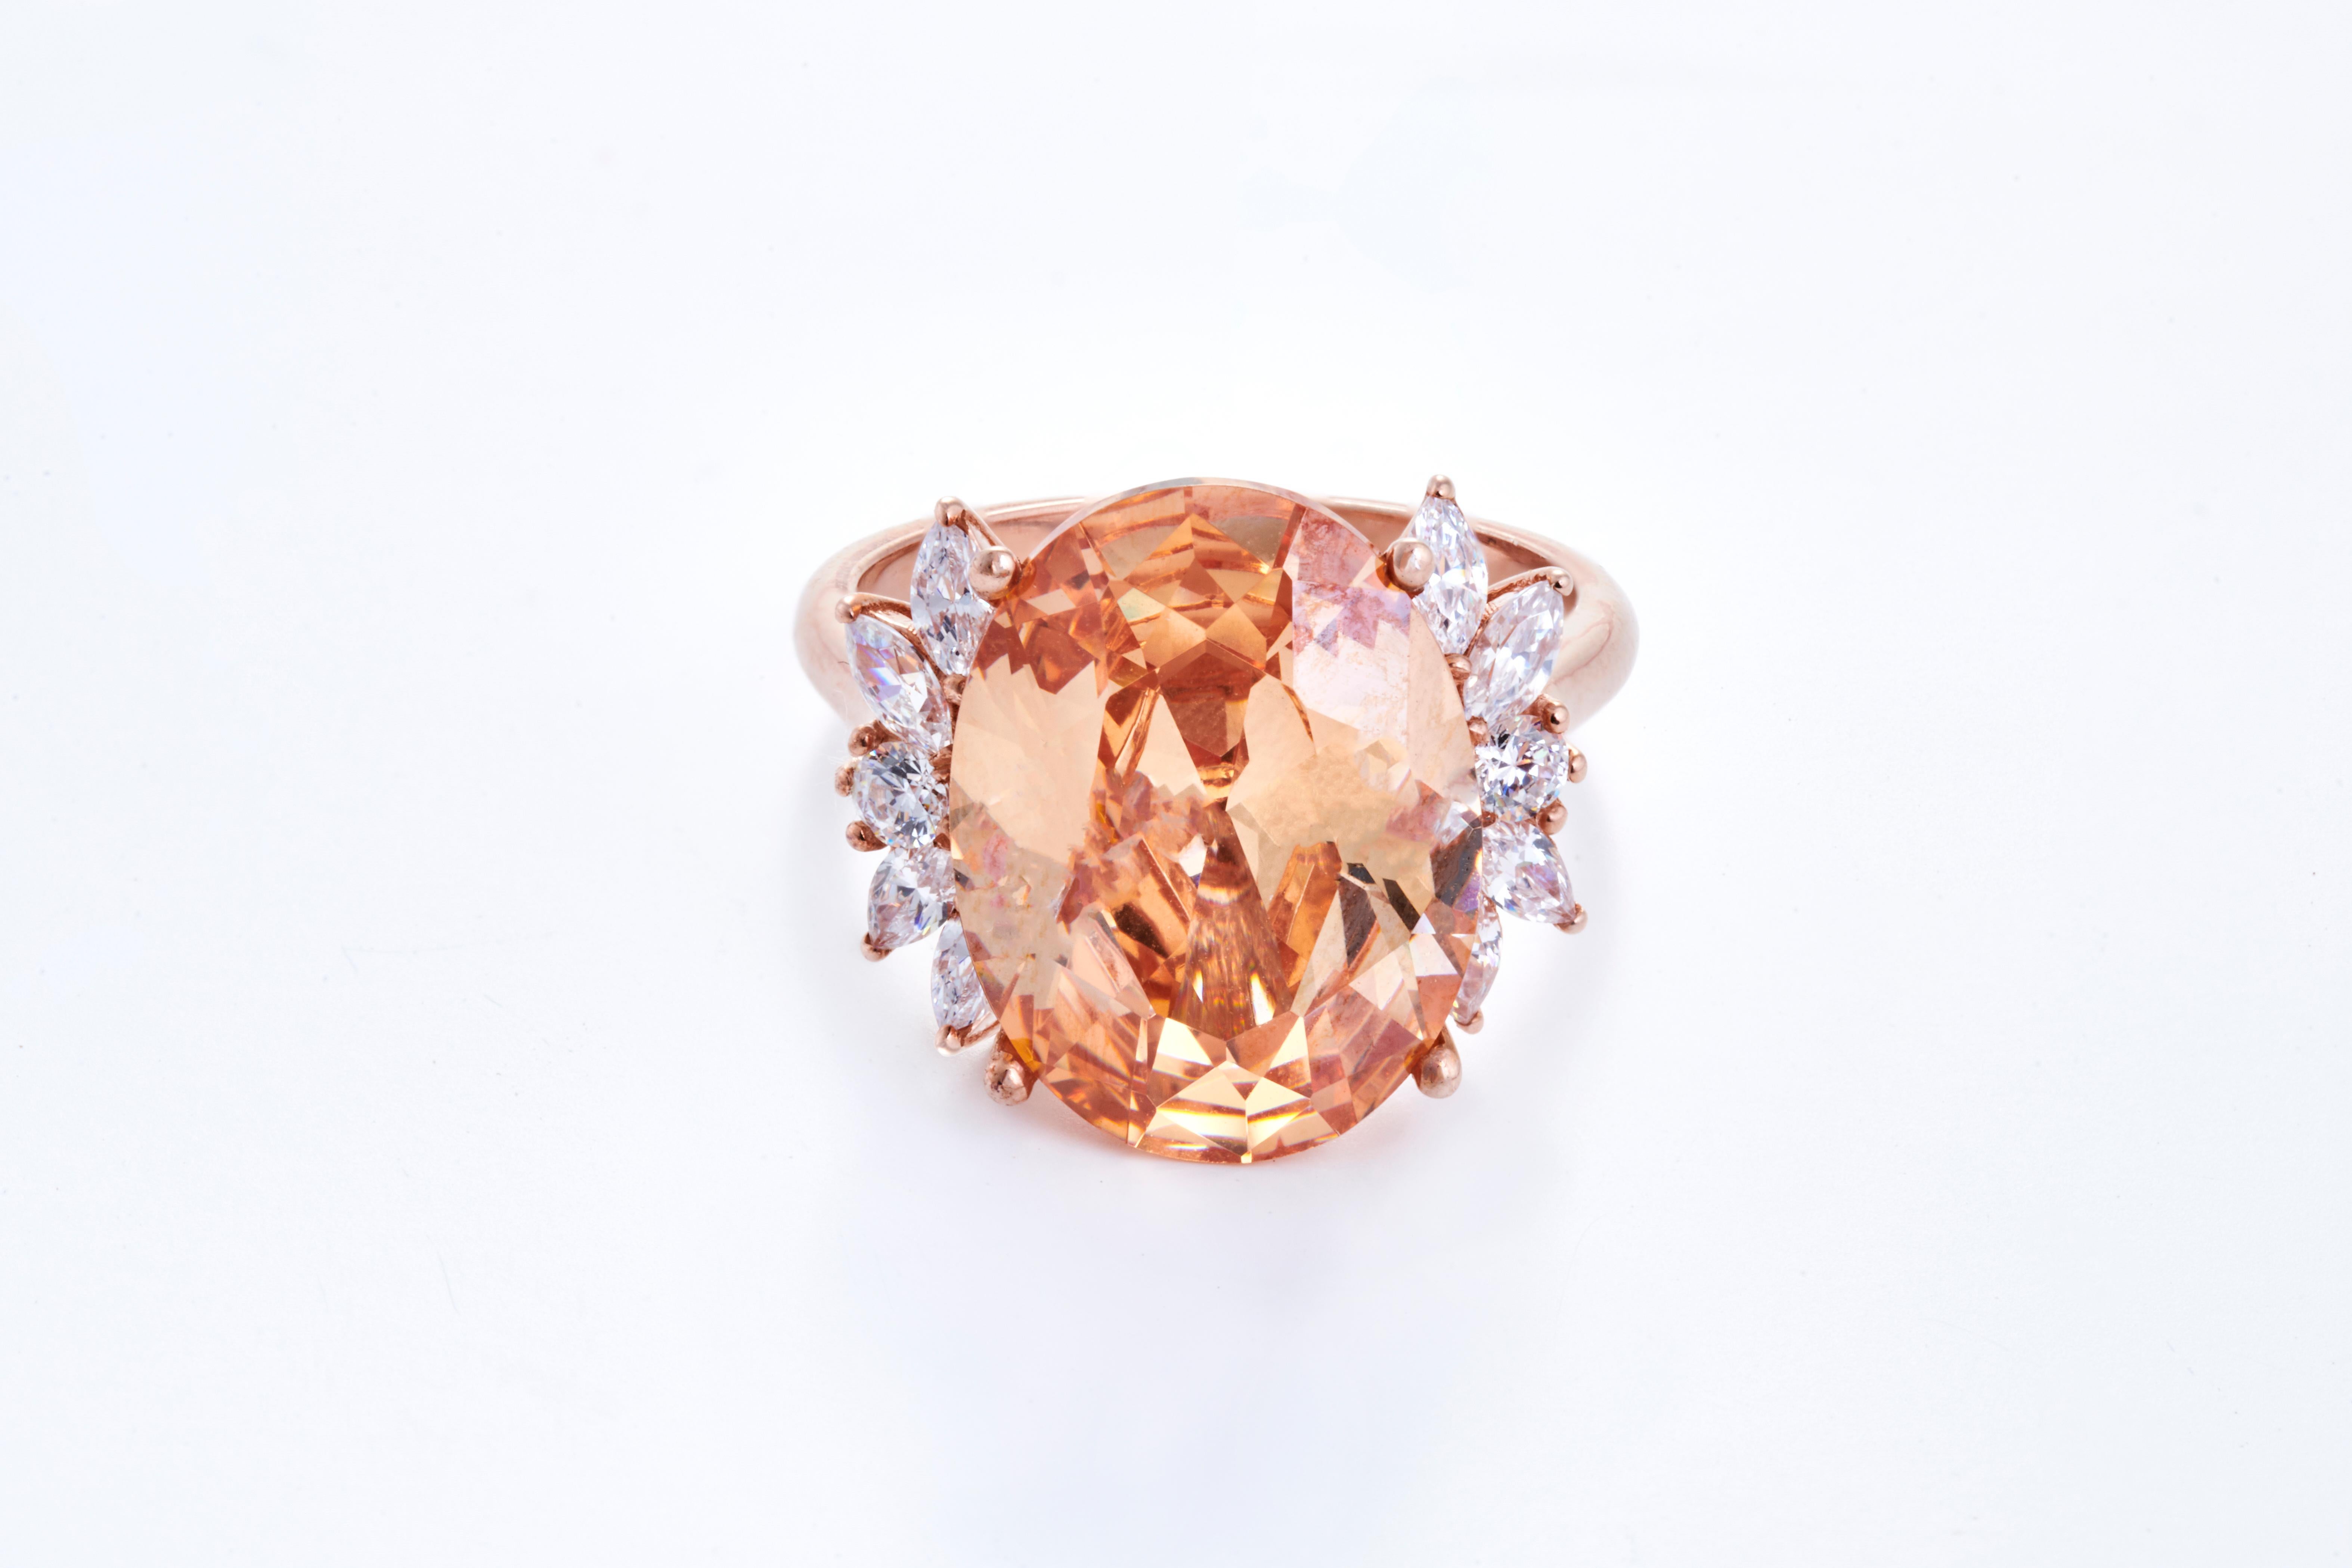 Set in 4.40 grams of 18K Rose Gold with 2 round cut diamonds on and sides and 8 Marquise cut diamond around them in VS/G quality and colour weighing 0.35 carats. 
The Morganite is the most admired gem amongst all the beryl group members, due to its